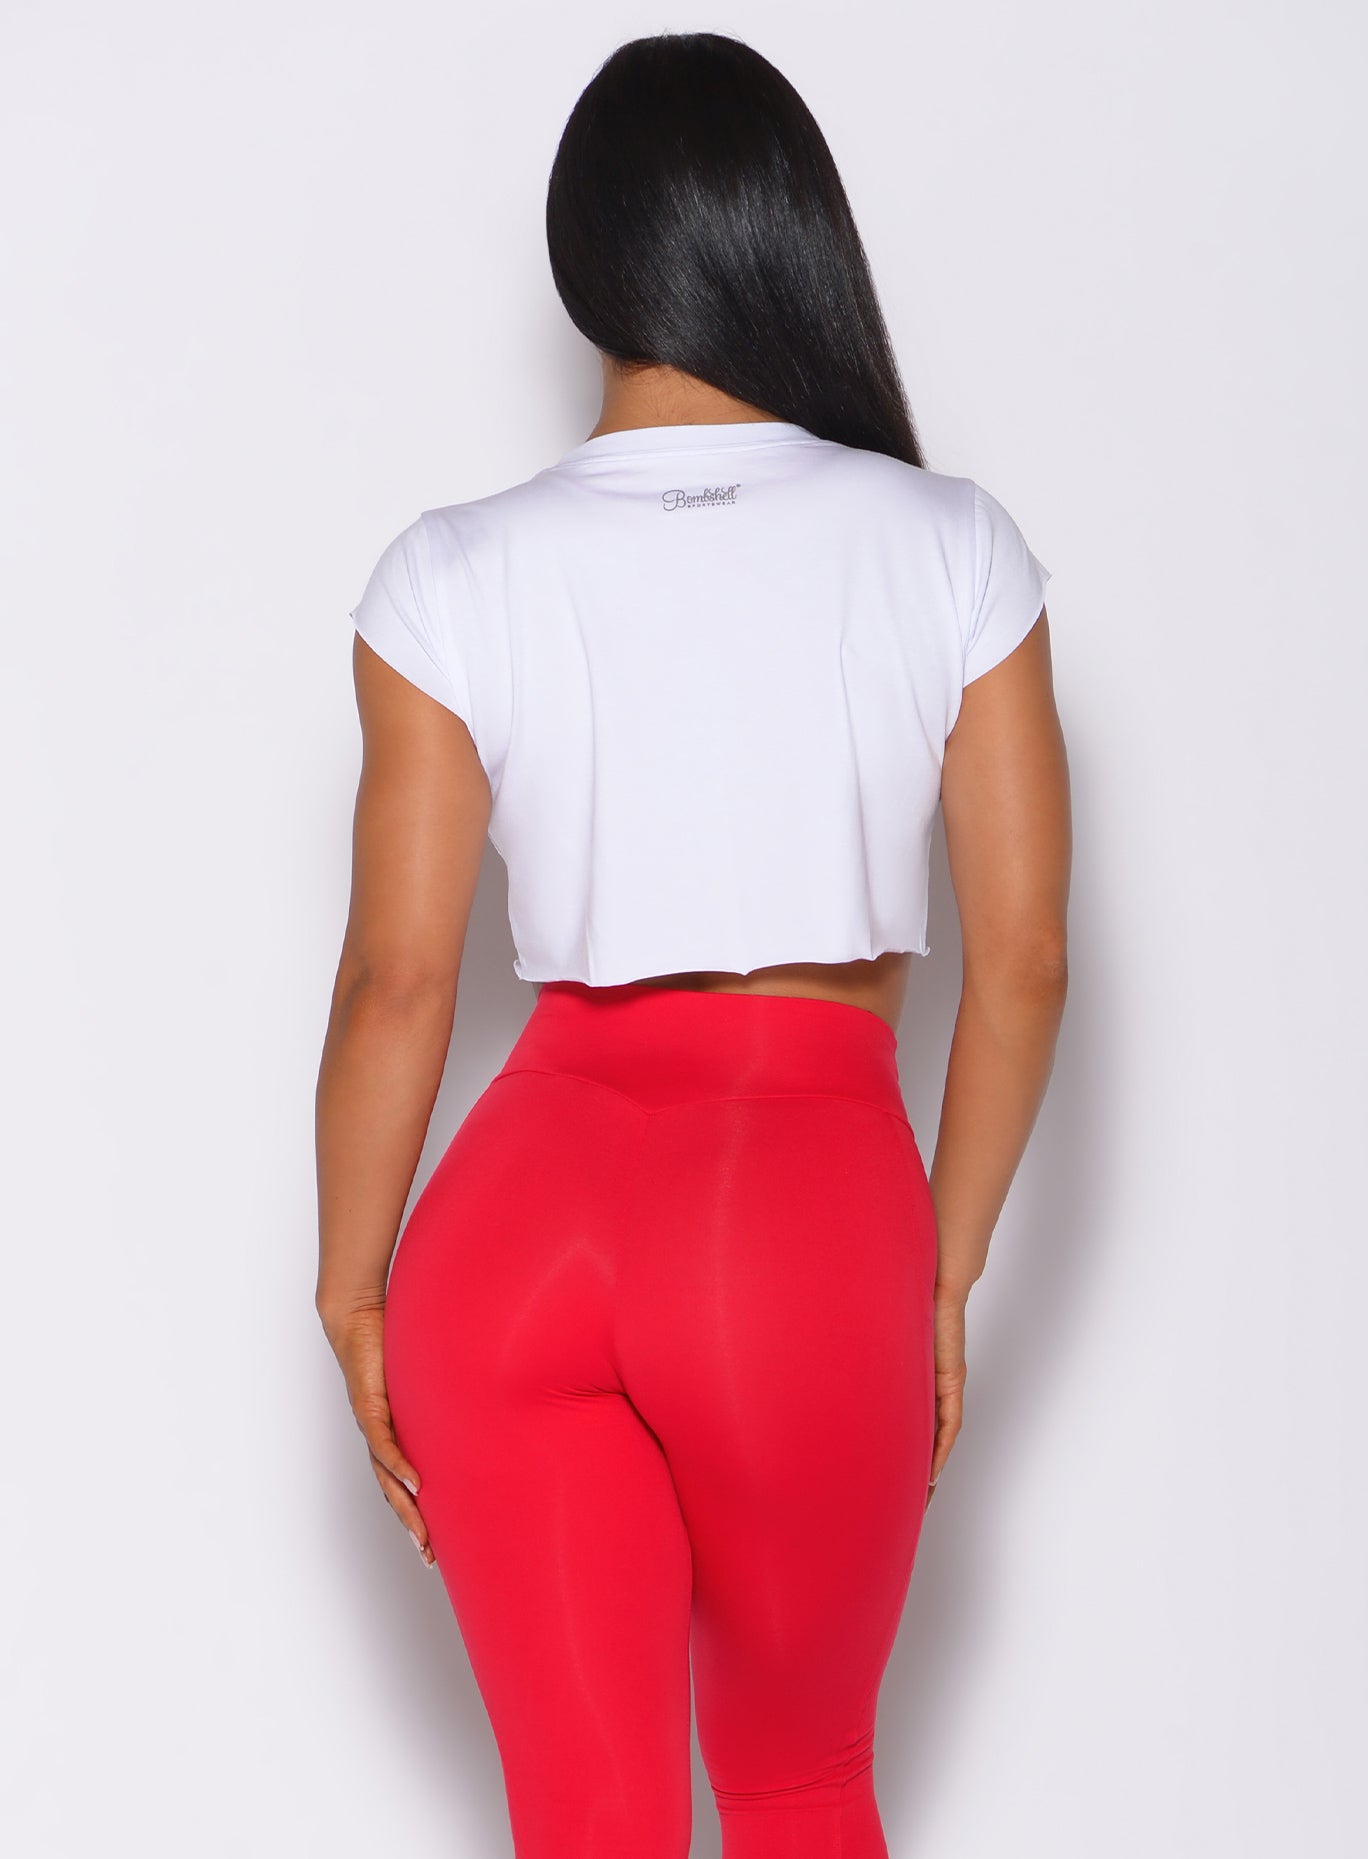 back profile profile view of a model in our white USA Barbell tee and a red leggings